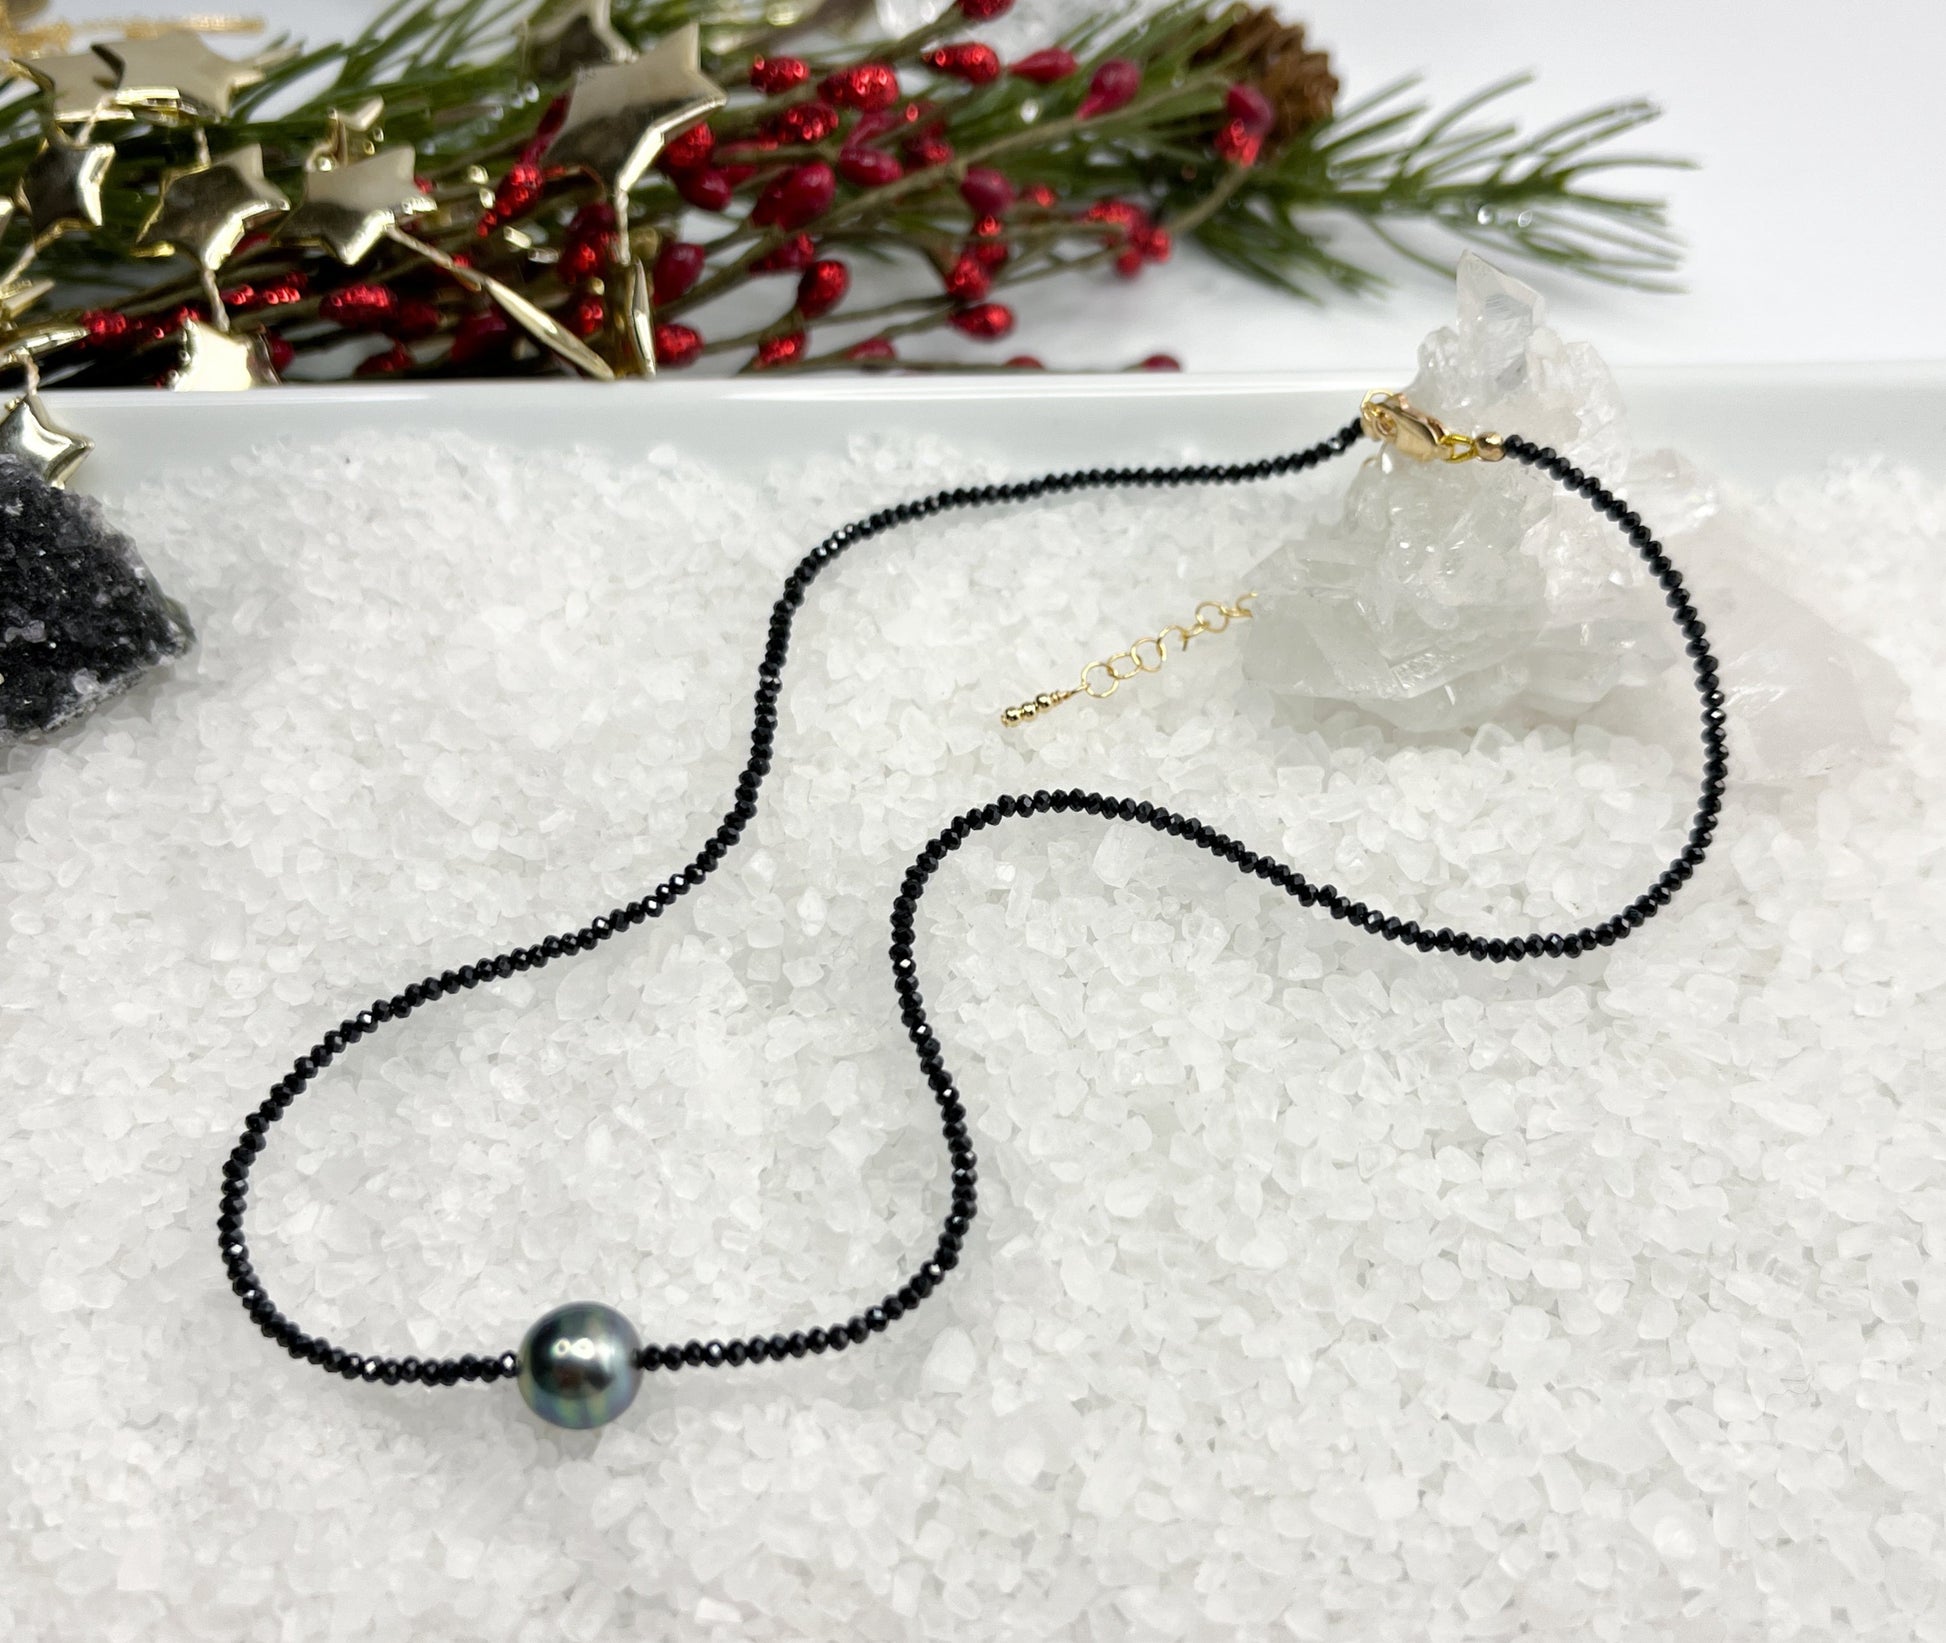 Tahitian Pearl & Black Spinel Necklace